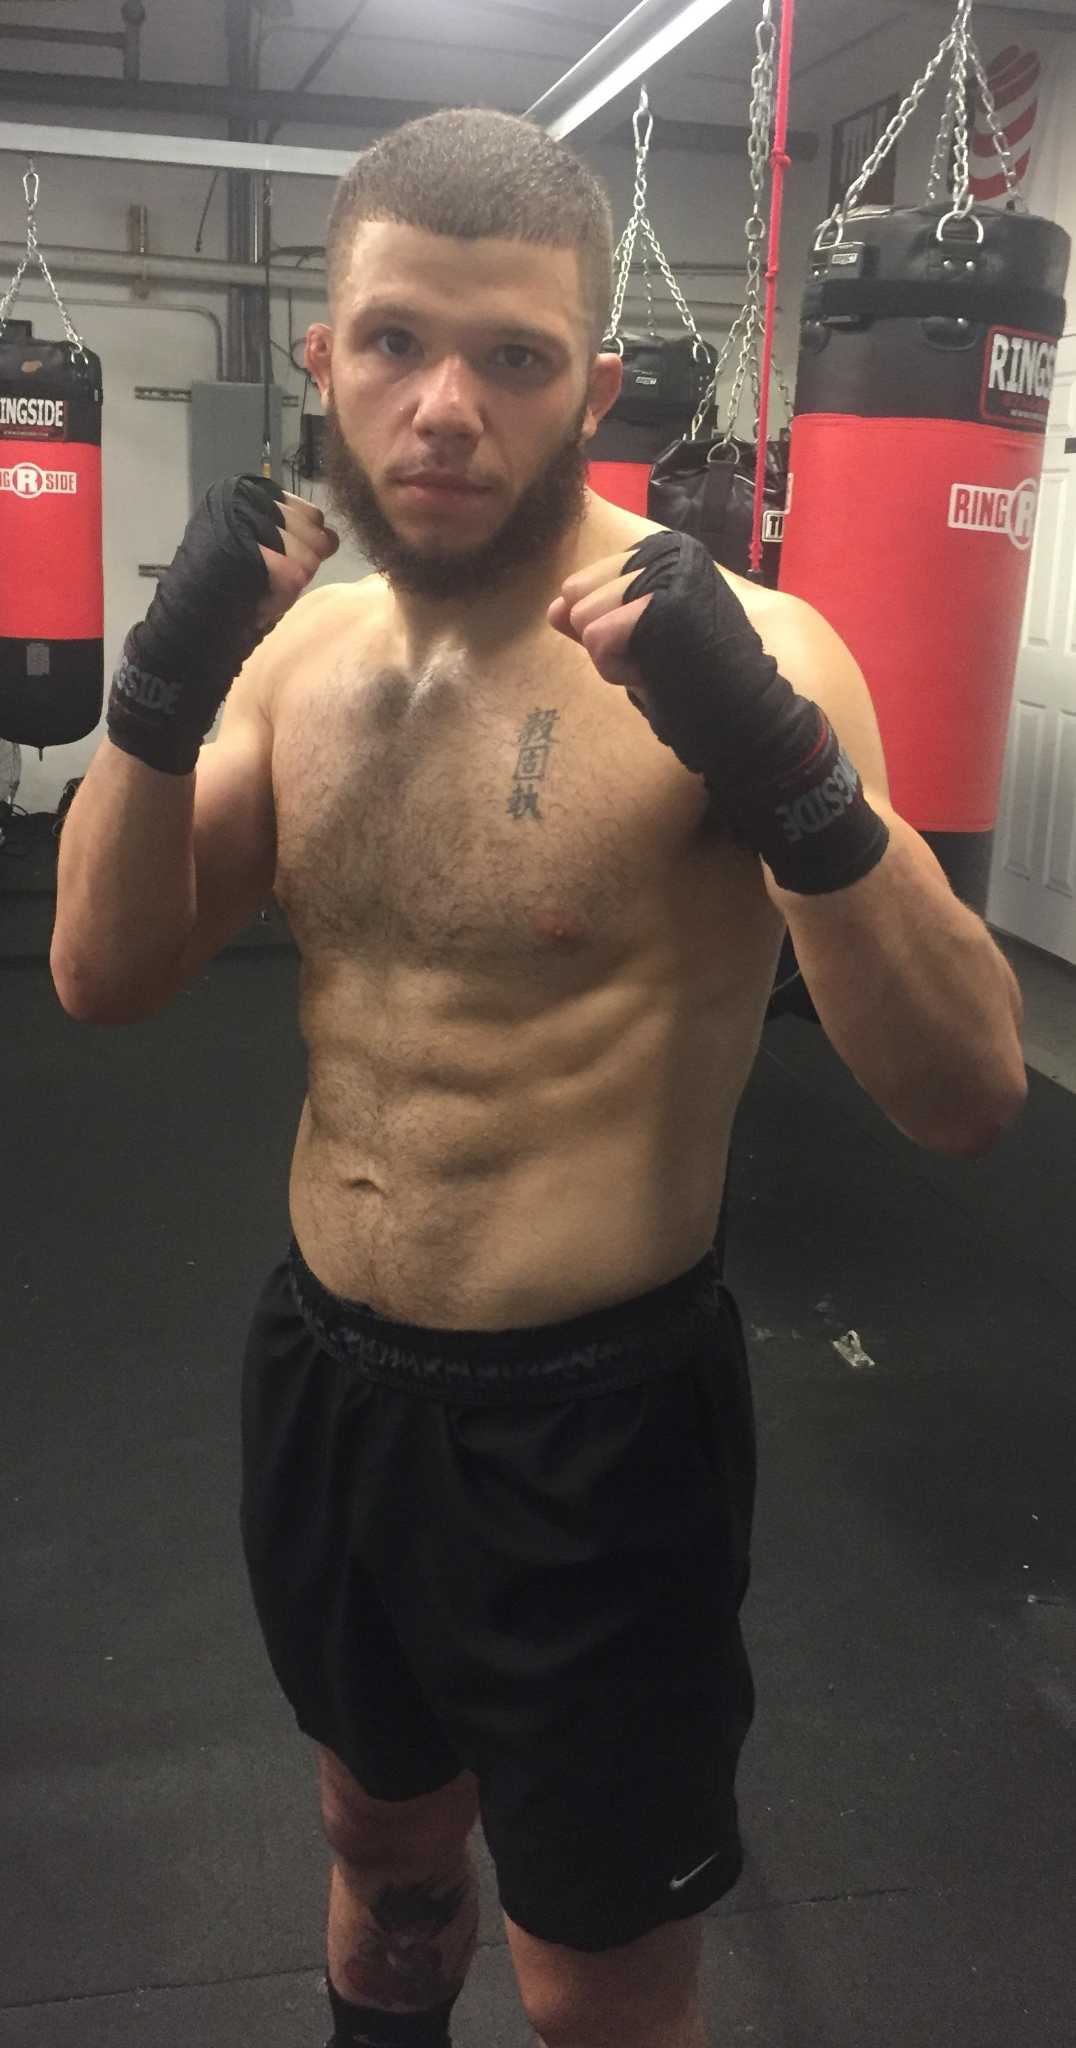 Danbury fighter set to make pro boxing debut at Foxwoods